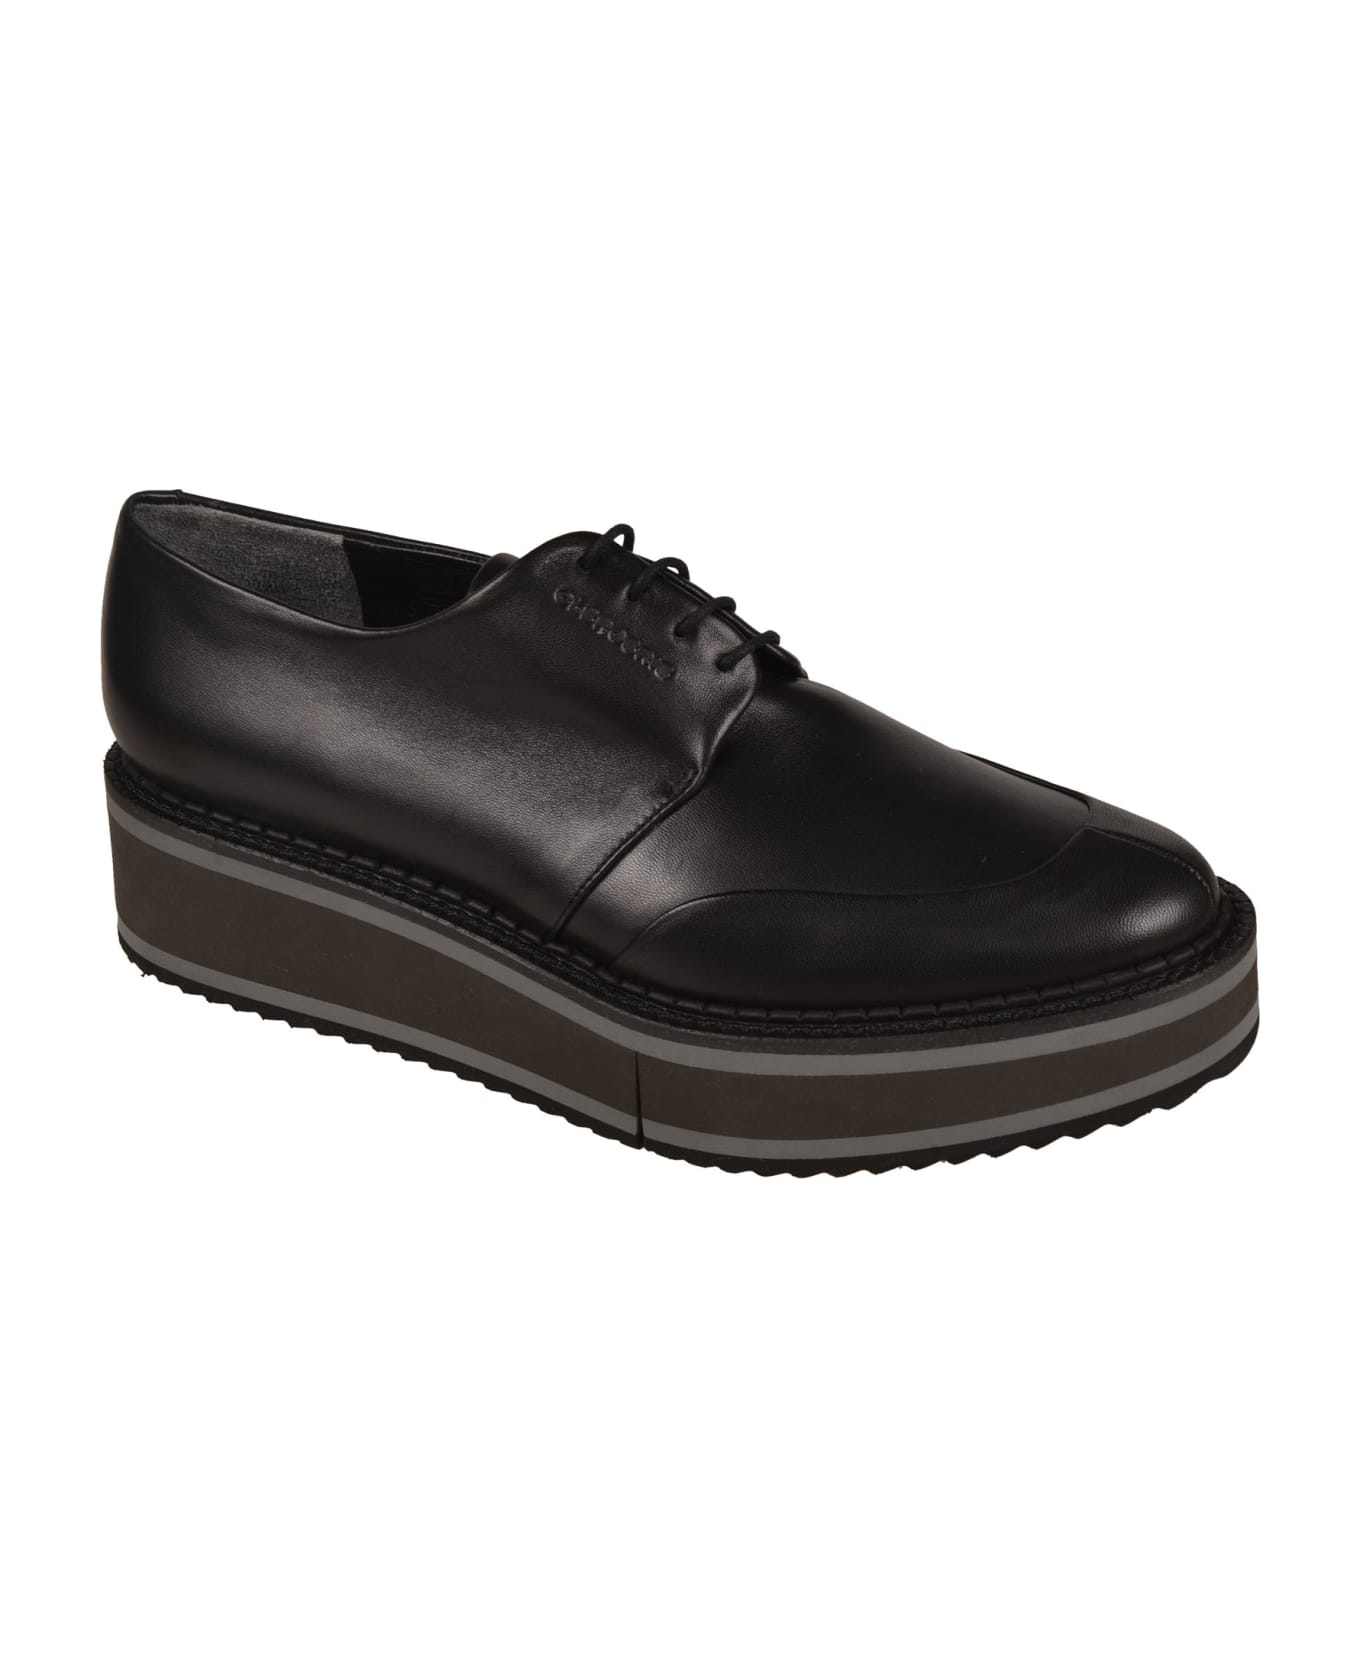 Clergerie Bree Oxford Shoes - Black